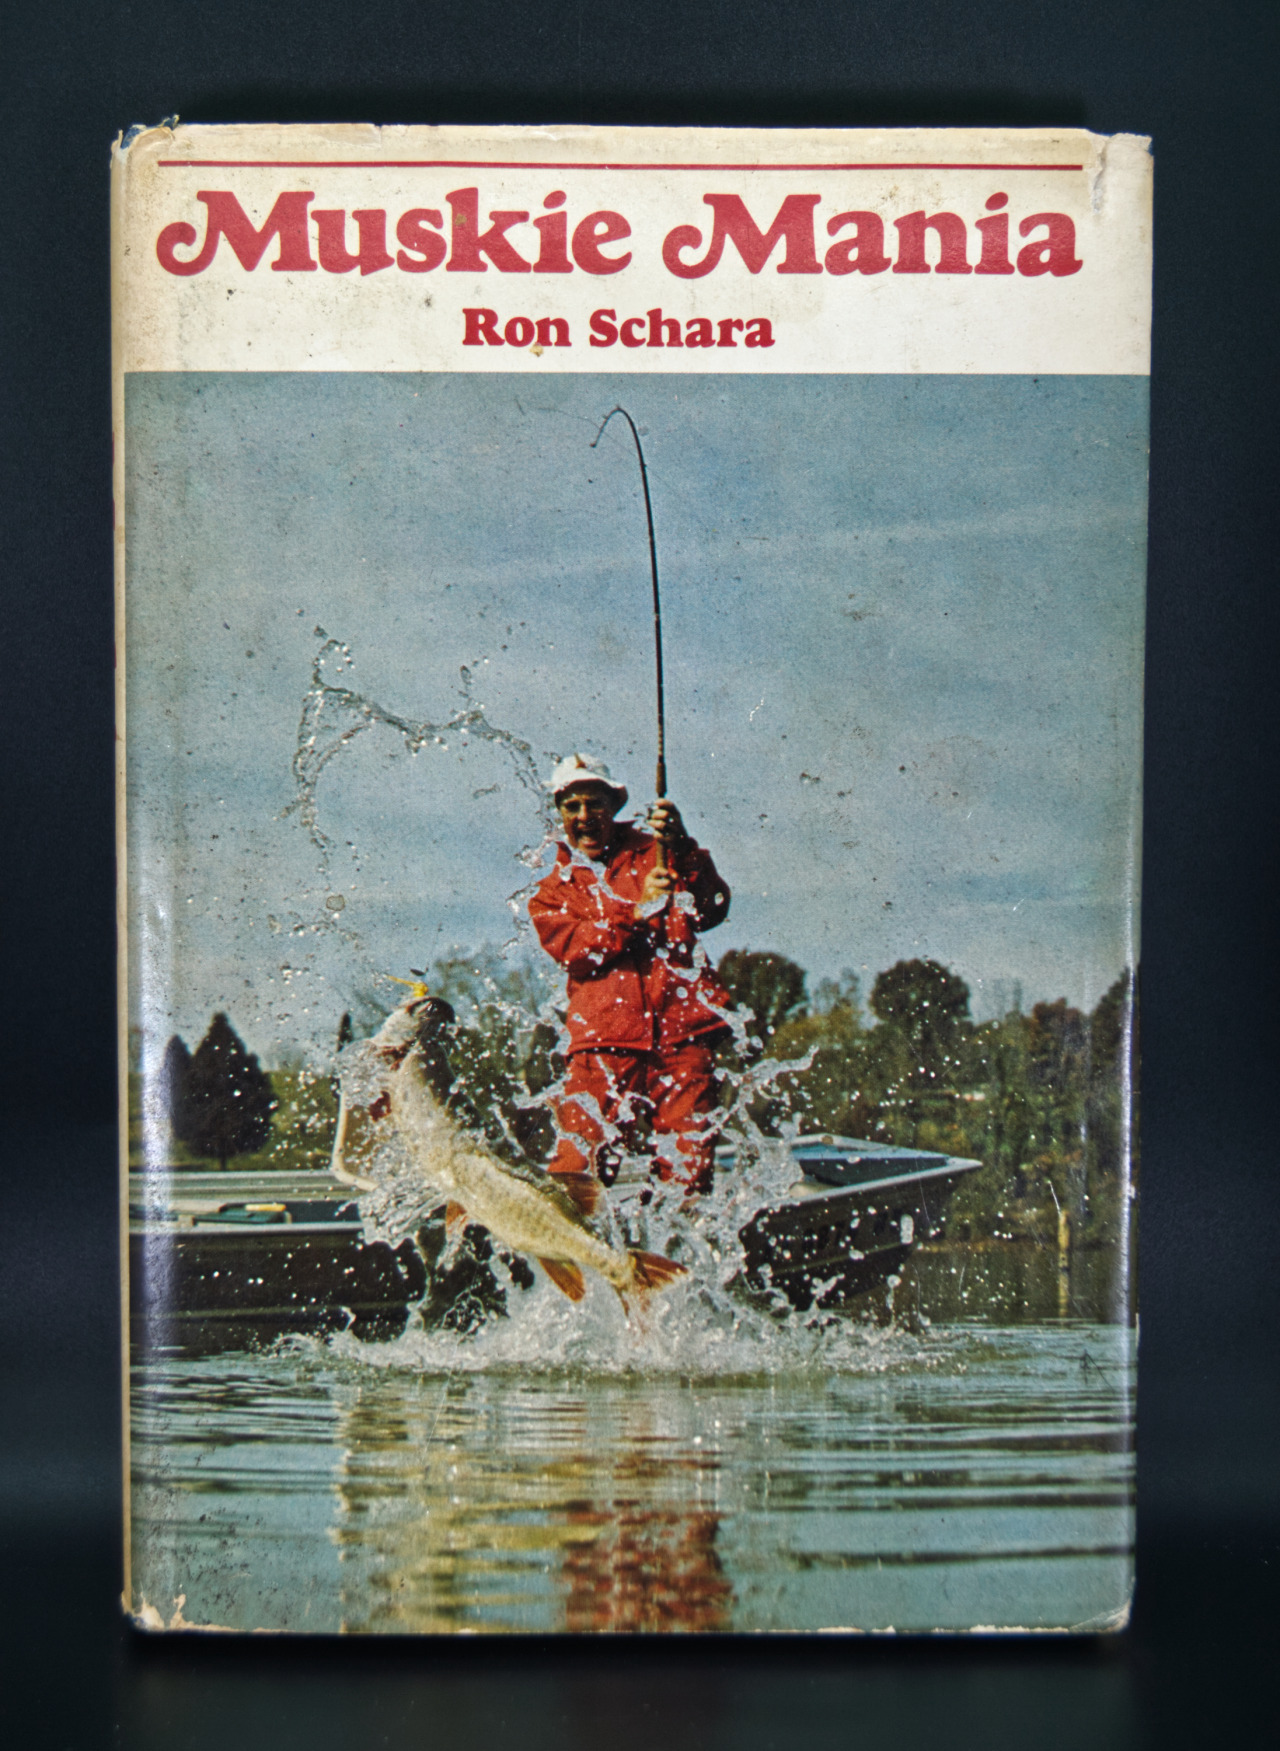 Picked up this old book Muskie Mania by Ron Schara. #fishing#fishing book#book#muskie#musky#Ron Schara